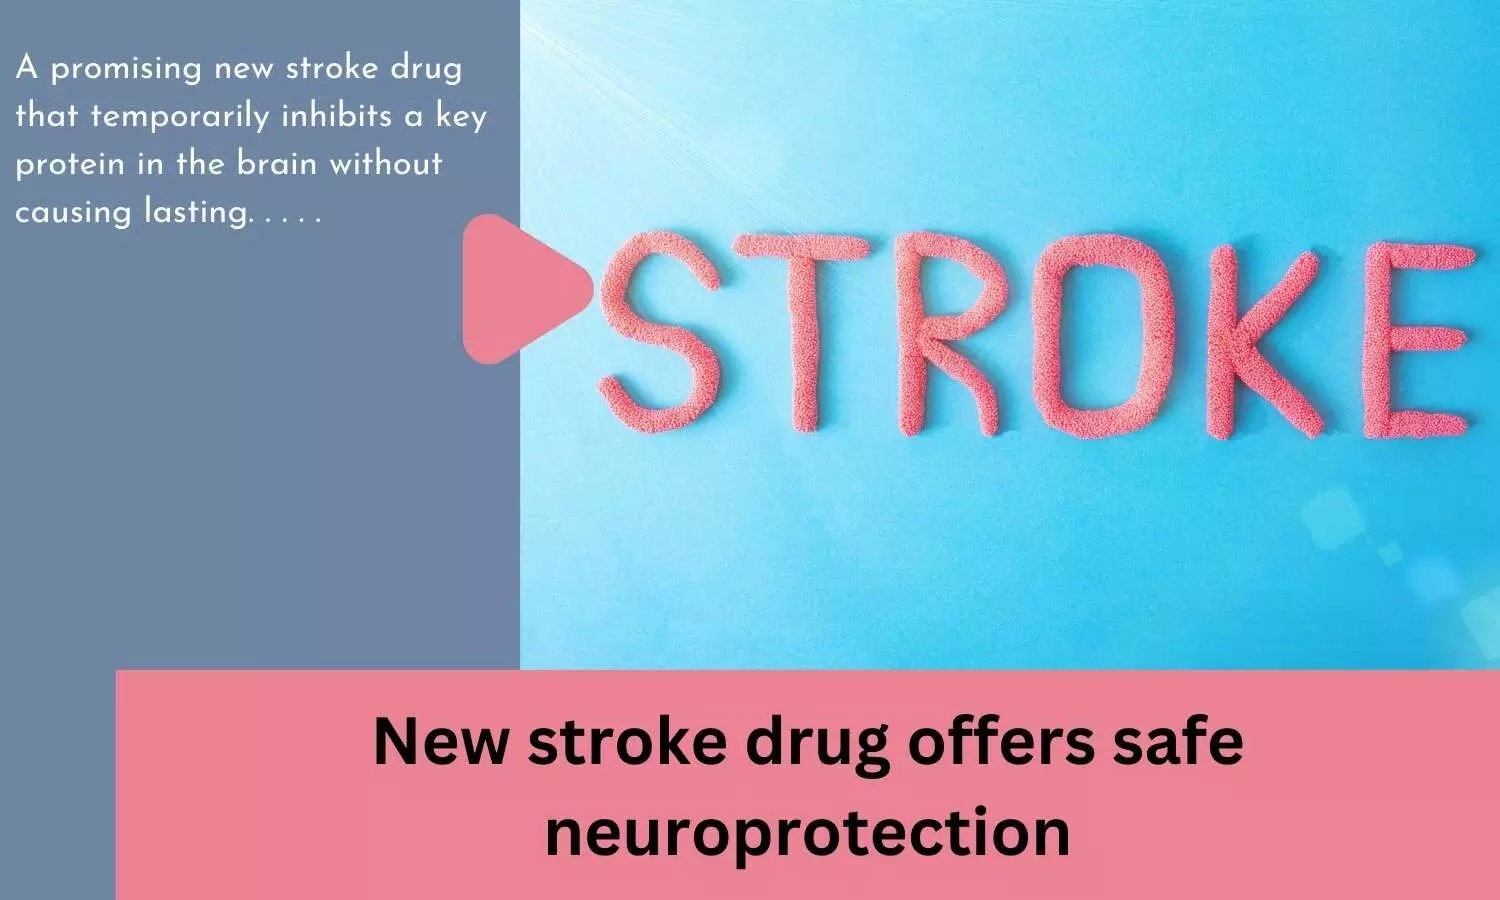 New stroke drug offers safe neuroprotection